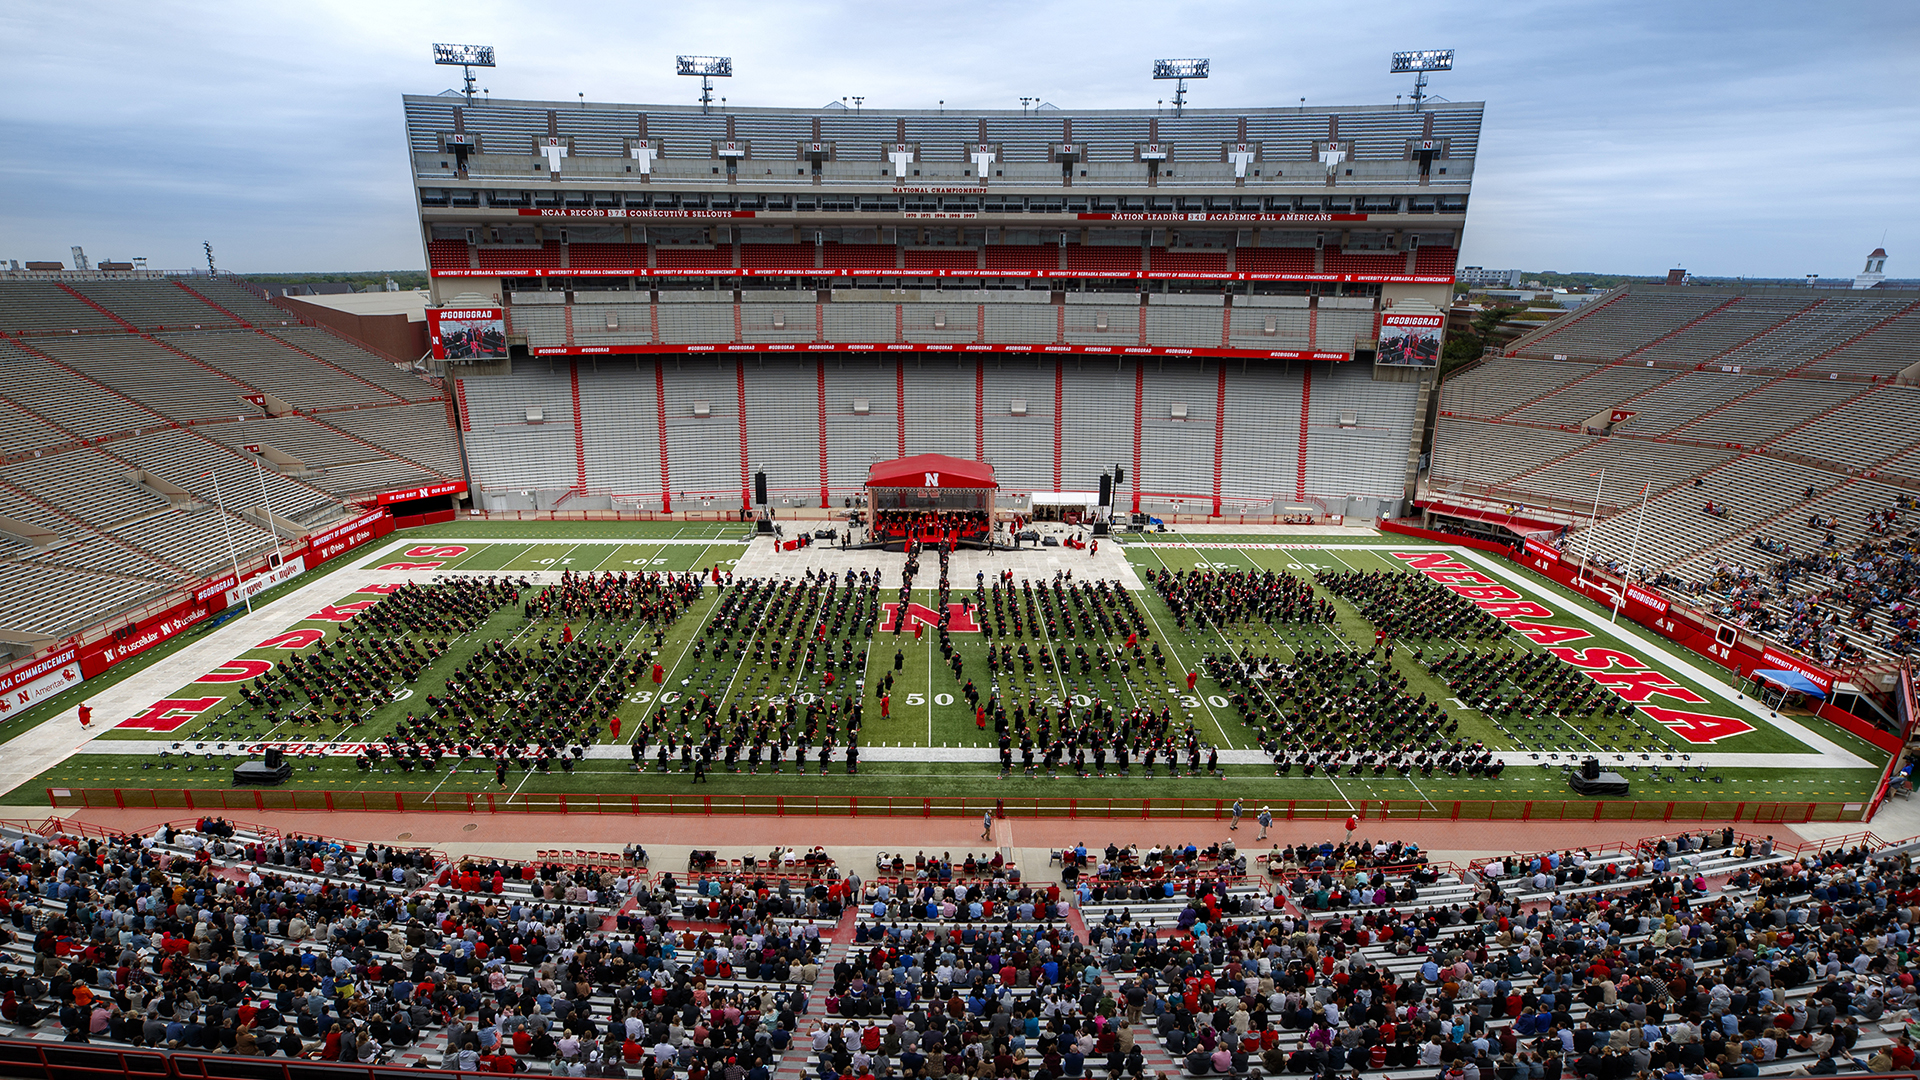 Thirteen Nebraska Engineering graduates will be among the 81 University of Nebraska-Lincoln students recognized as Chancellor's Scholars at the May 18 undergraduate commencement ceremony at Memorial Stadium.